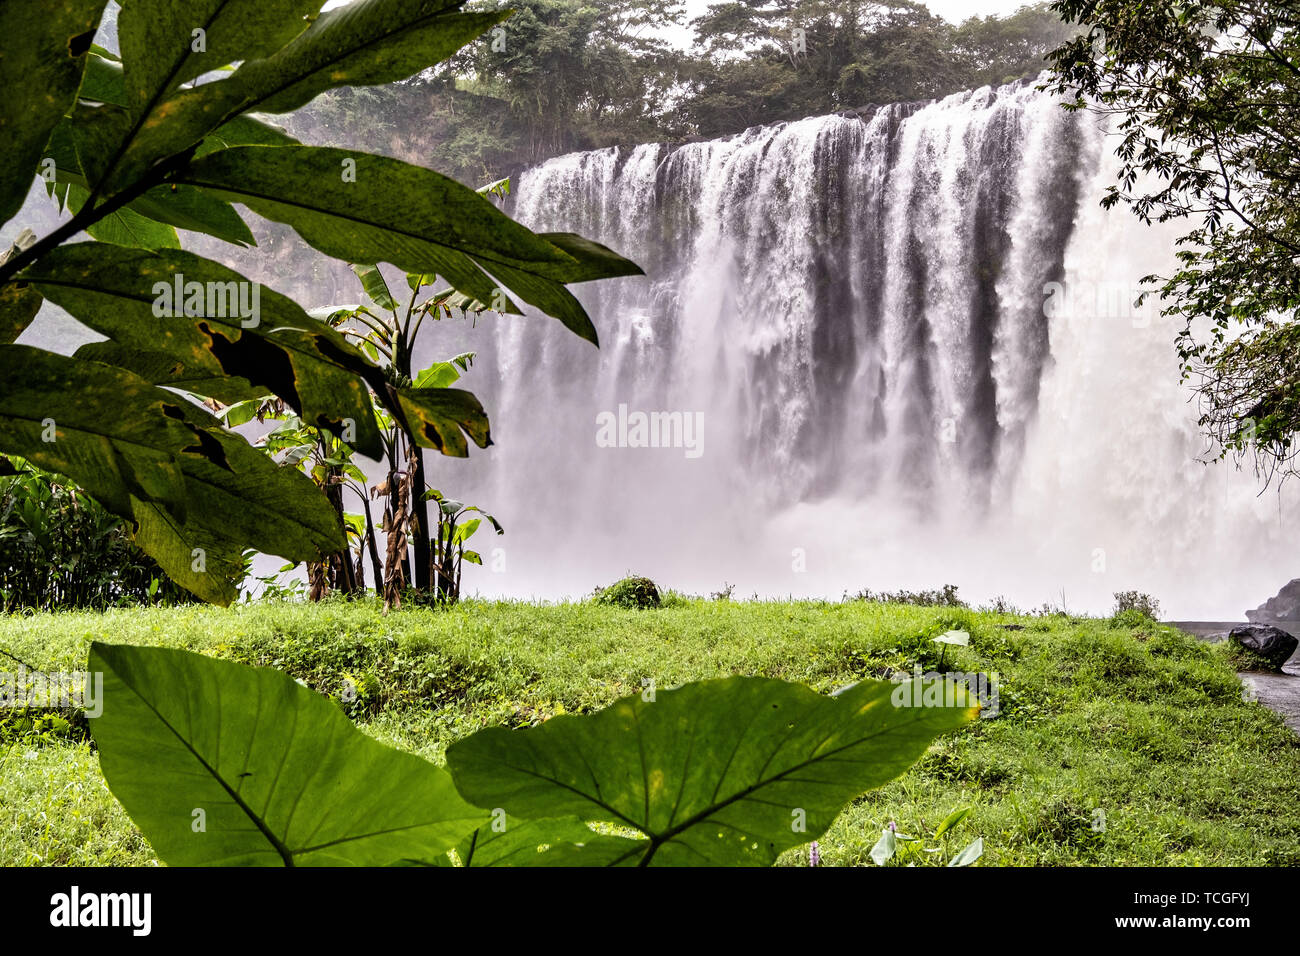 The Massive Eyipantla Falls Where The Catemaco River Drops 50 Meters To The Lower Jungle Near San Andres Tuxtlas Veracruz Mexico The Waterfall Is 40 Meters Wide And 50 Meters Tall Stock Photo Alamy